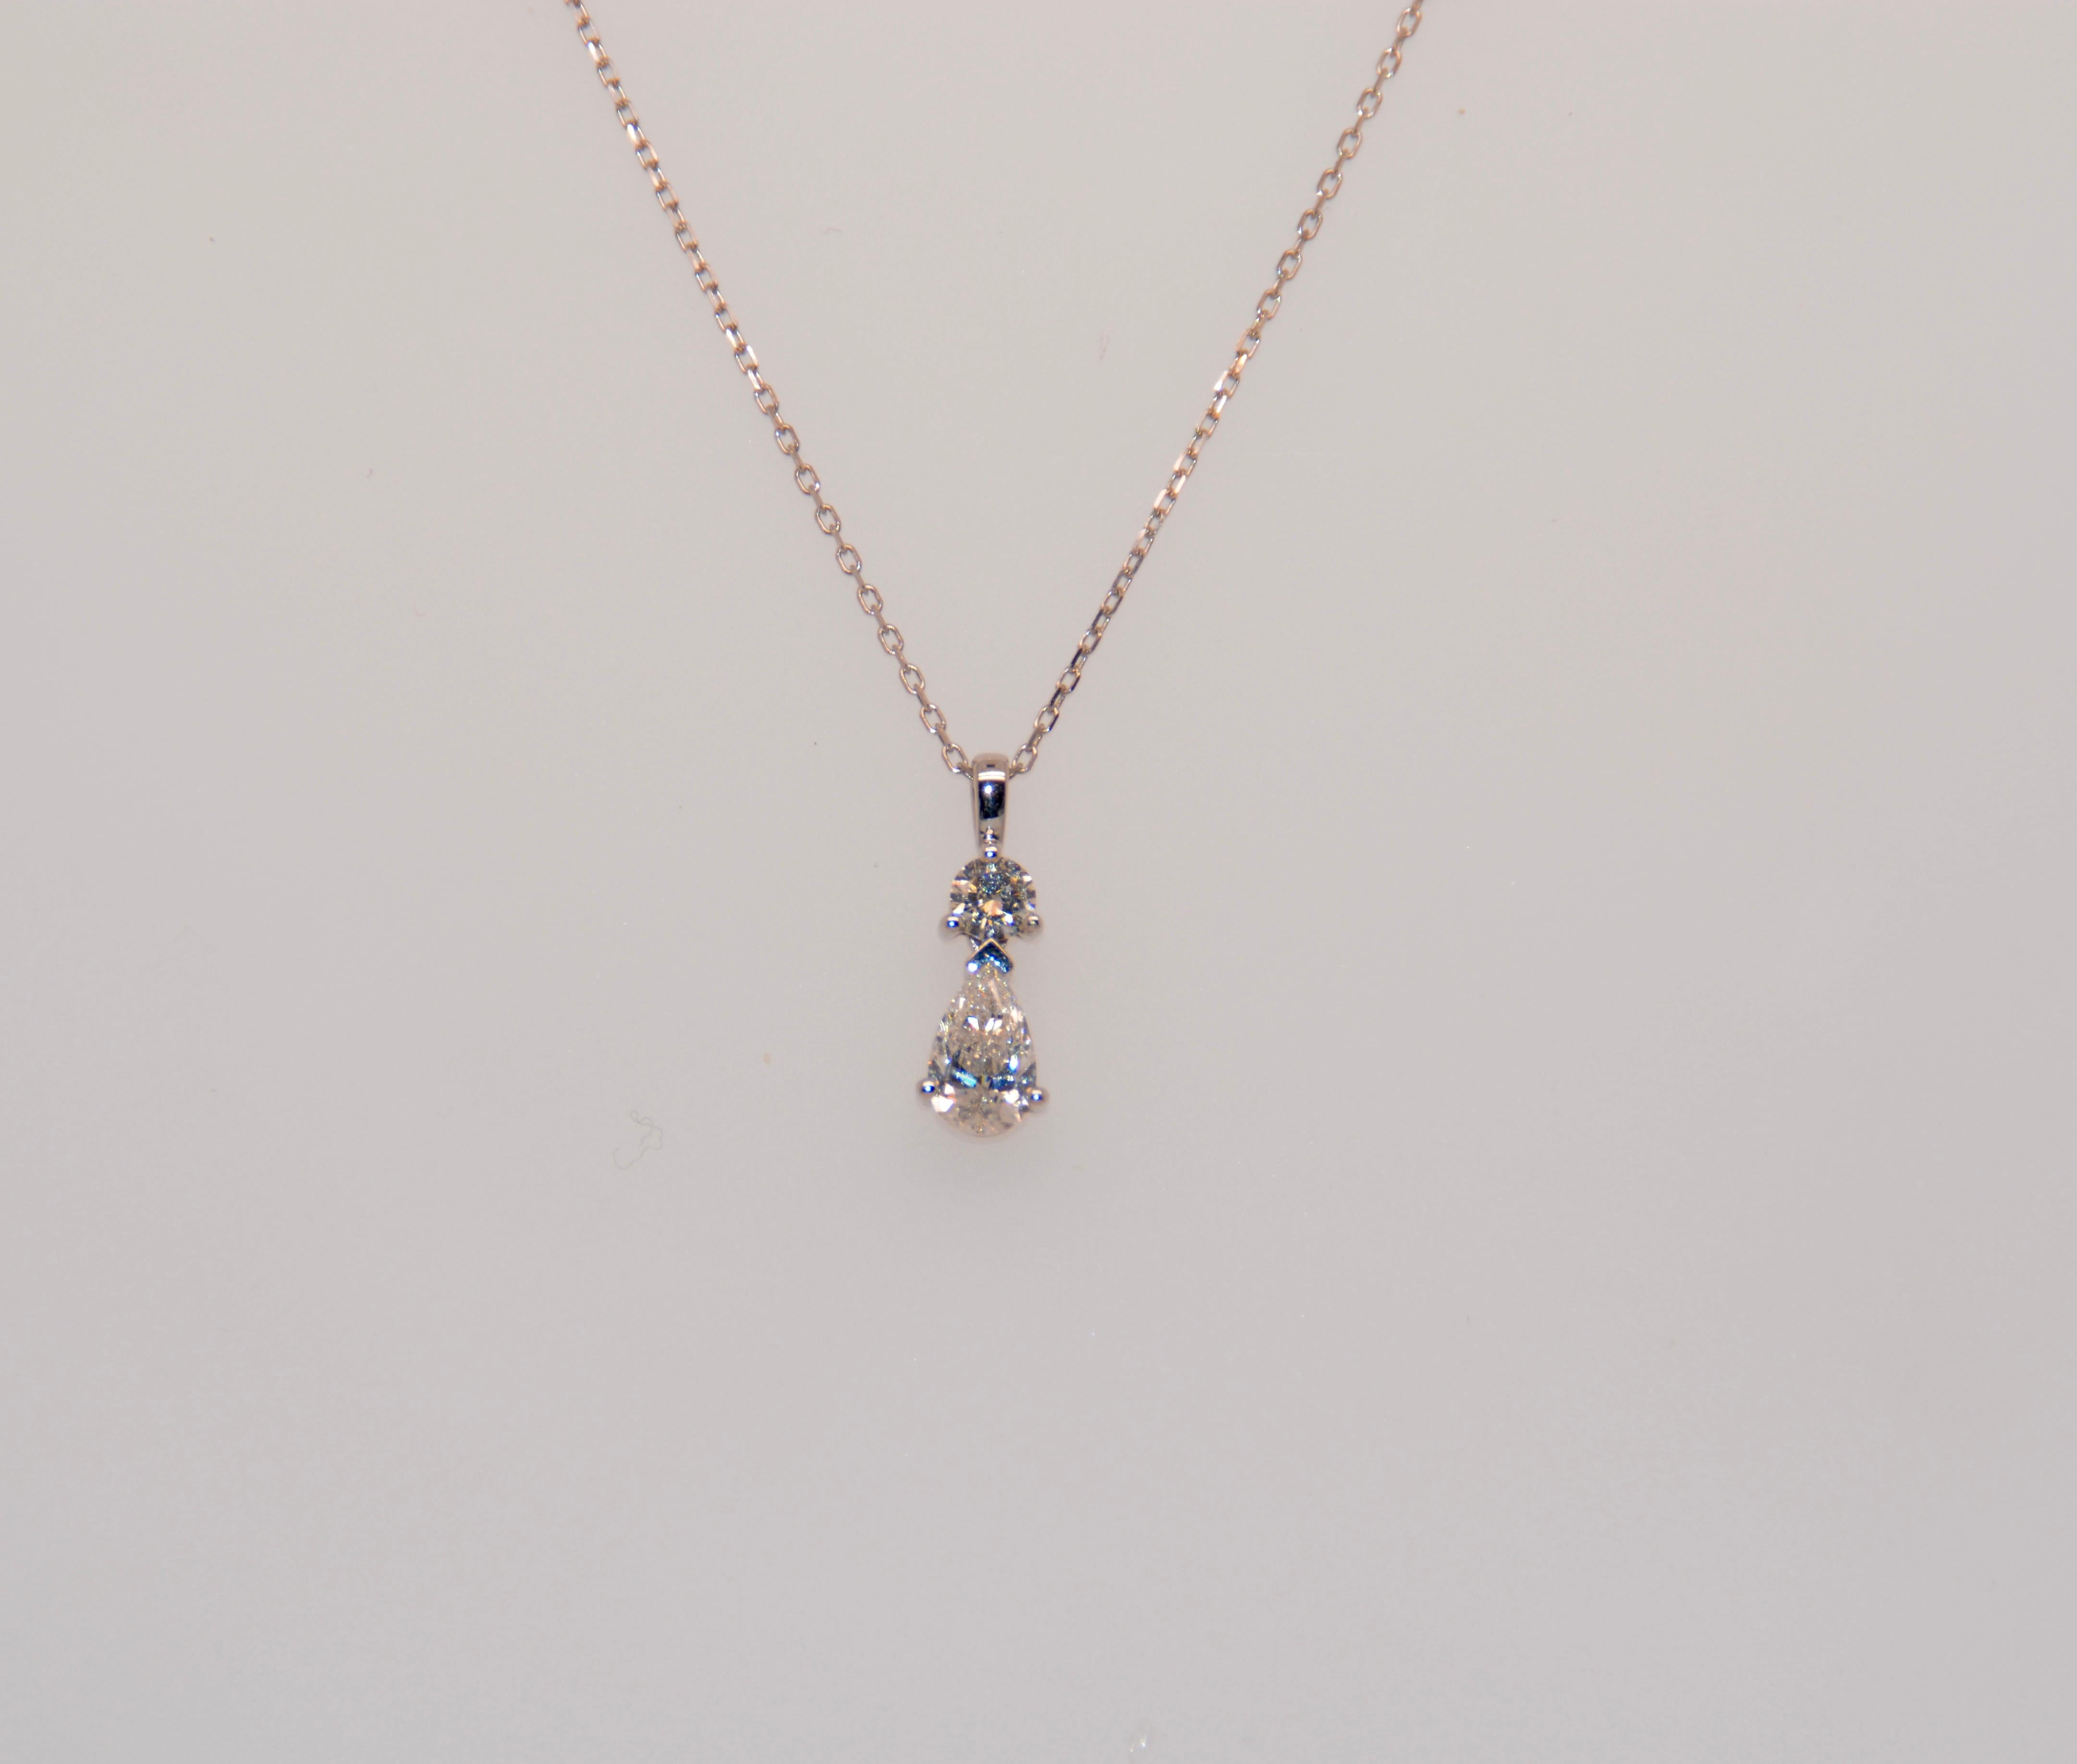 Pendant Necklace White Gold Diamond 

Gorgeous 18 carat white gold and diamond pendant. The pendant is topped with 2 diamonds. 1 brilliant cut diamond weighing 0.160 carats, color H, purity SI. 1 pear-shaped diamond, 540 carats in weight, H color,